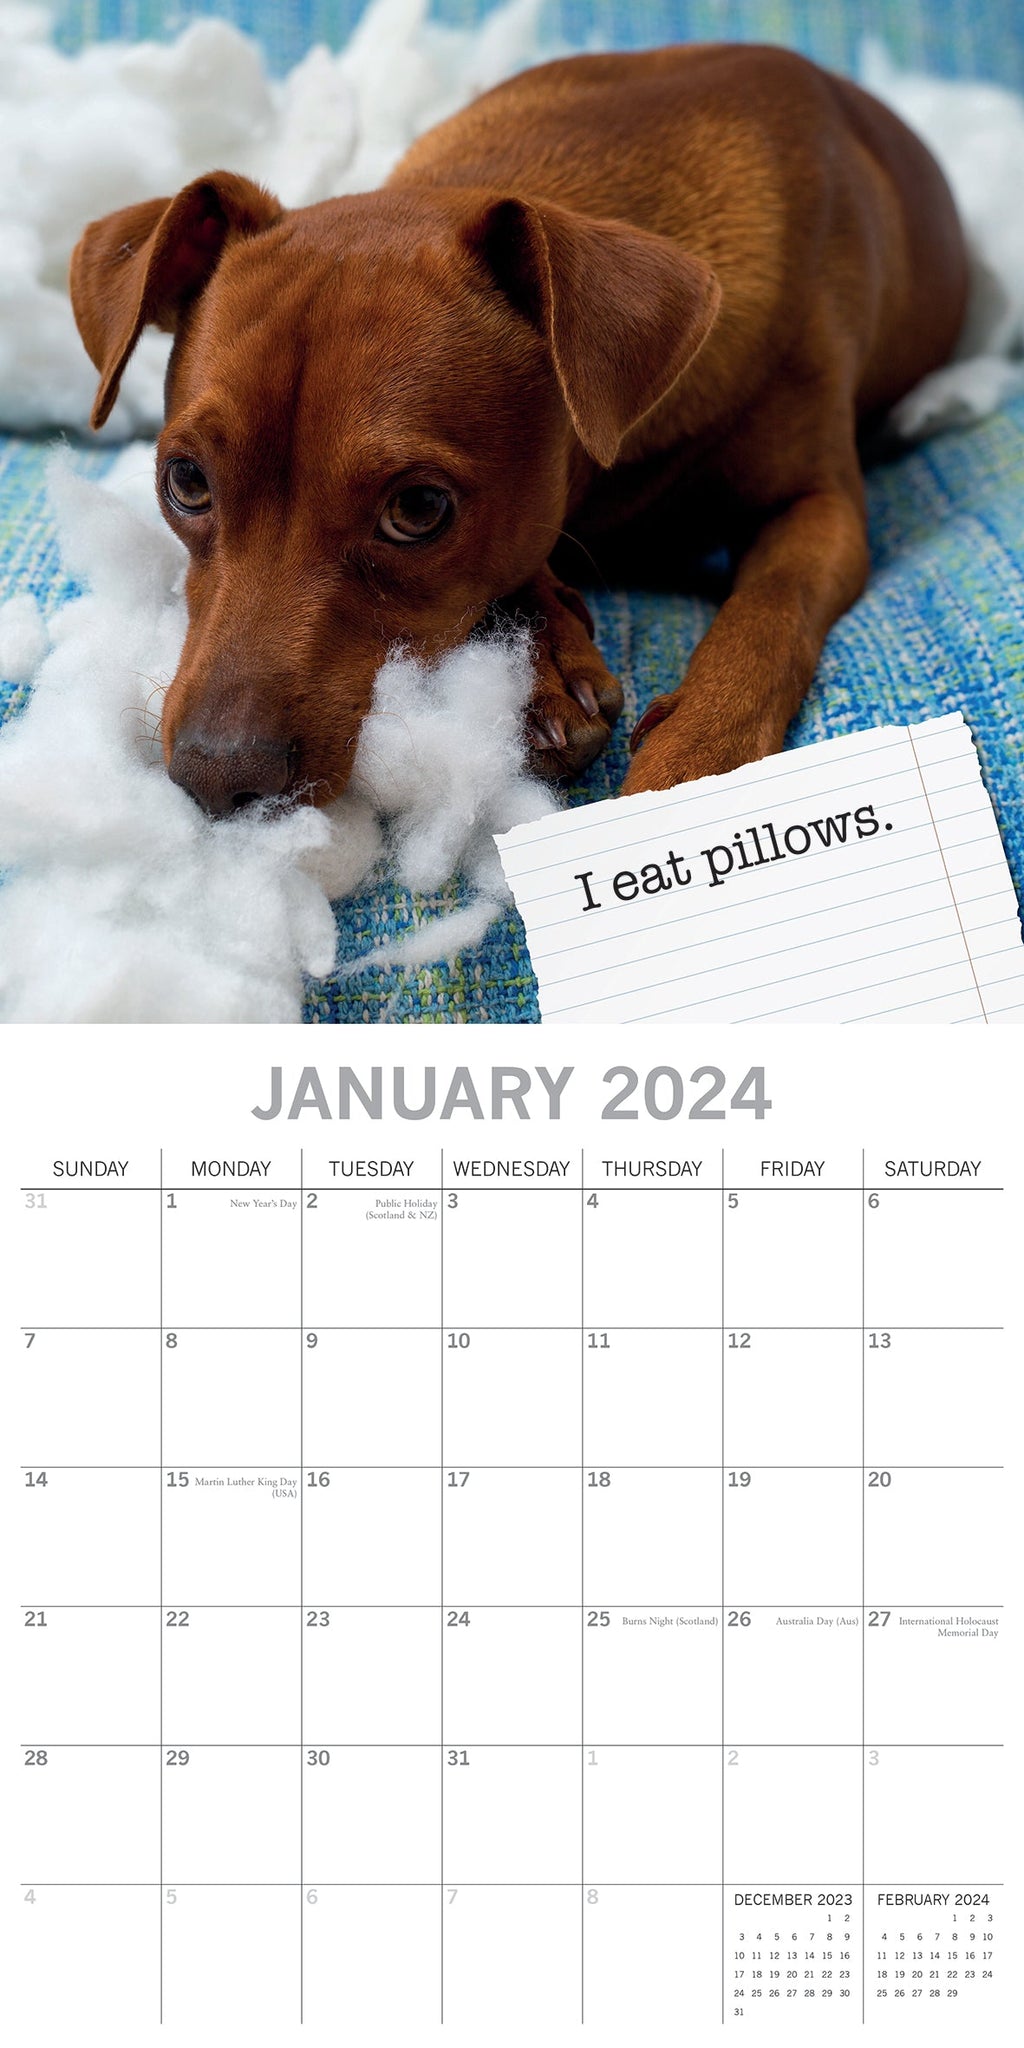 2024 Dog Shaming Square Wall Calendar Dogs & Puppies Calendars by